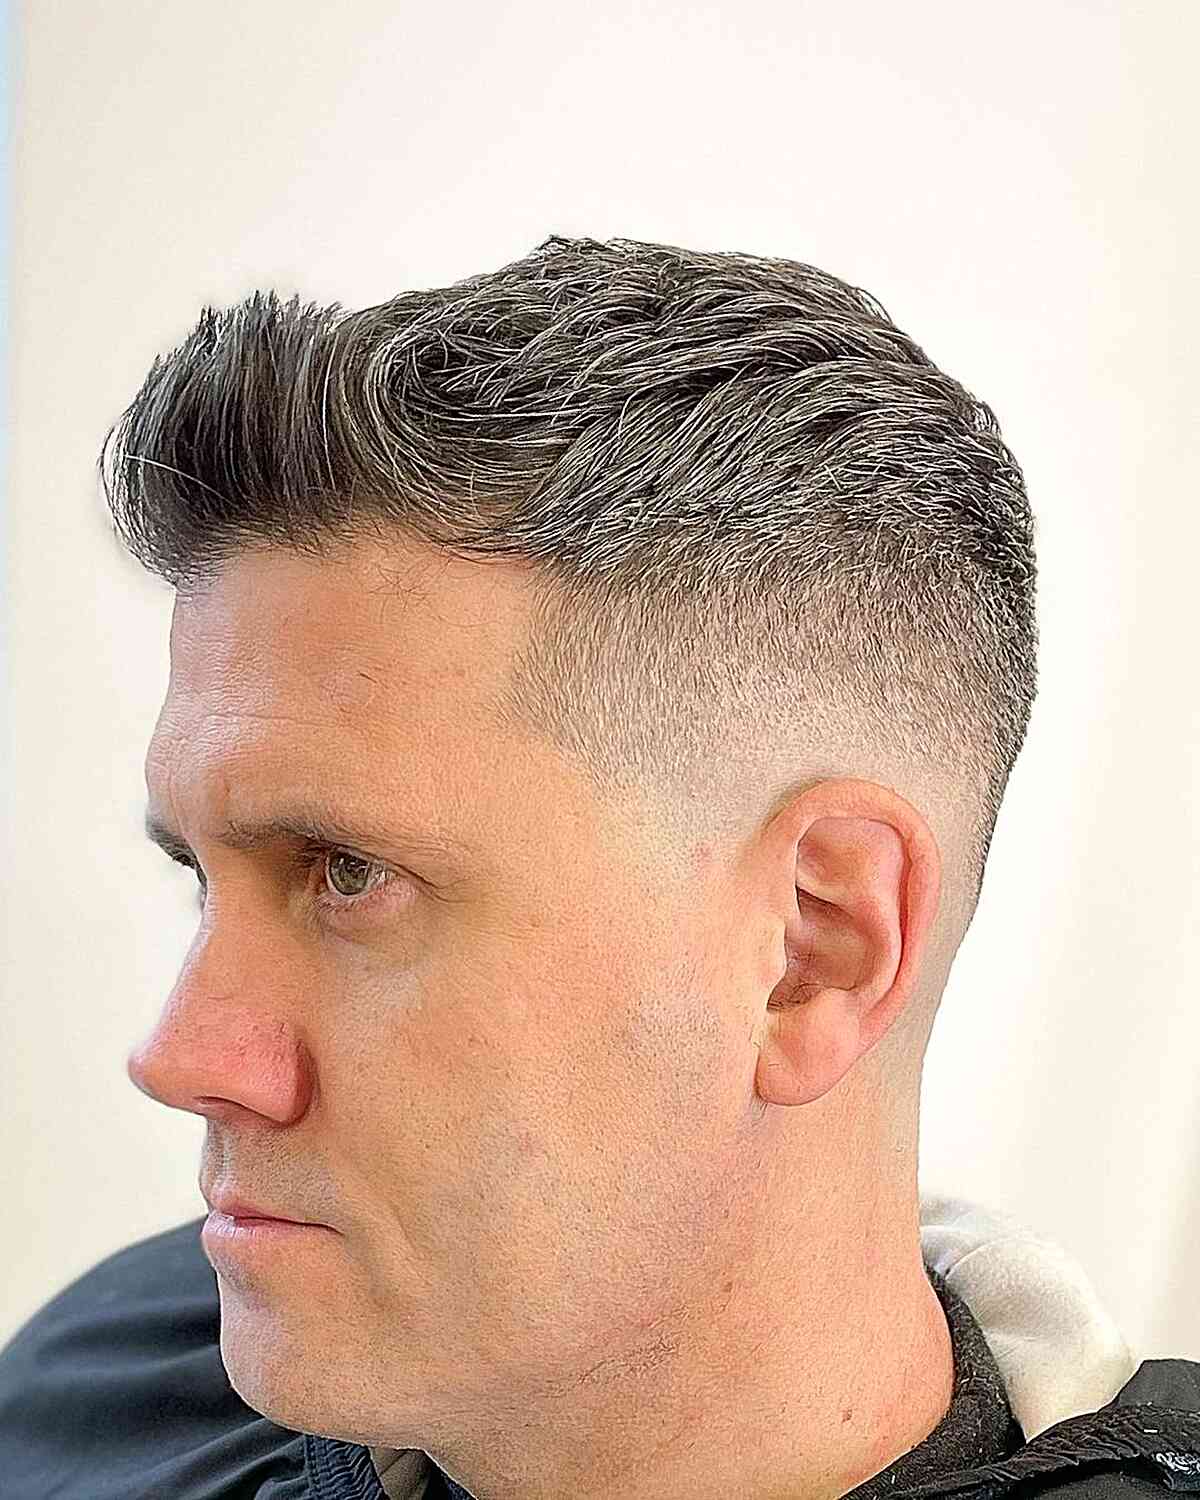 Grey Textured Top with Short Sides and Brushed-Up Bangs for Men Over 40